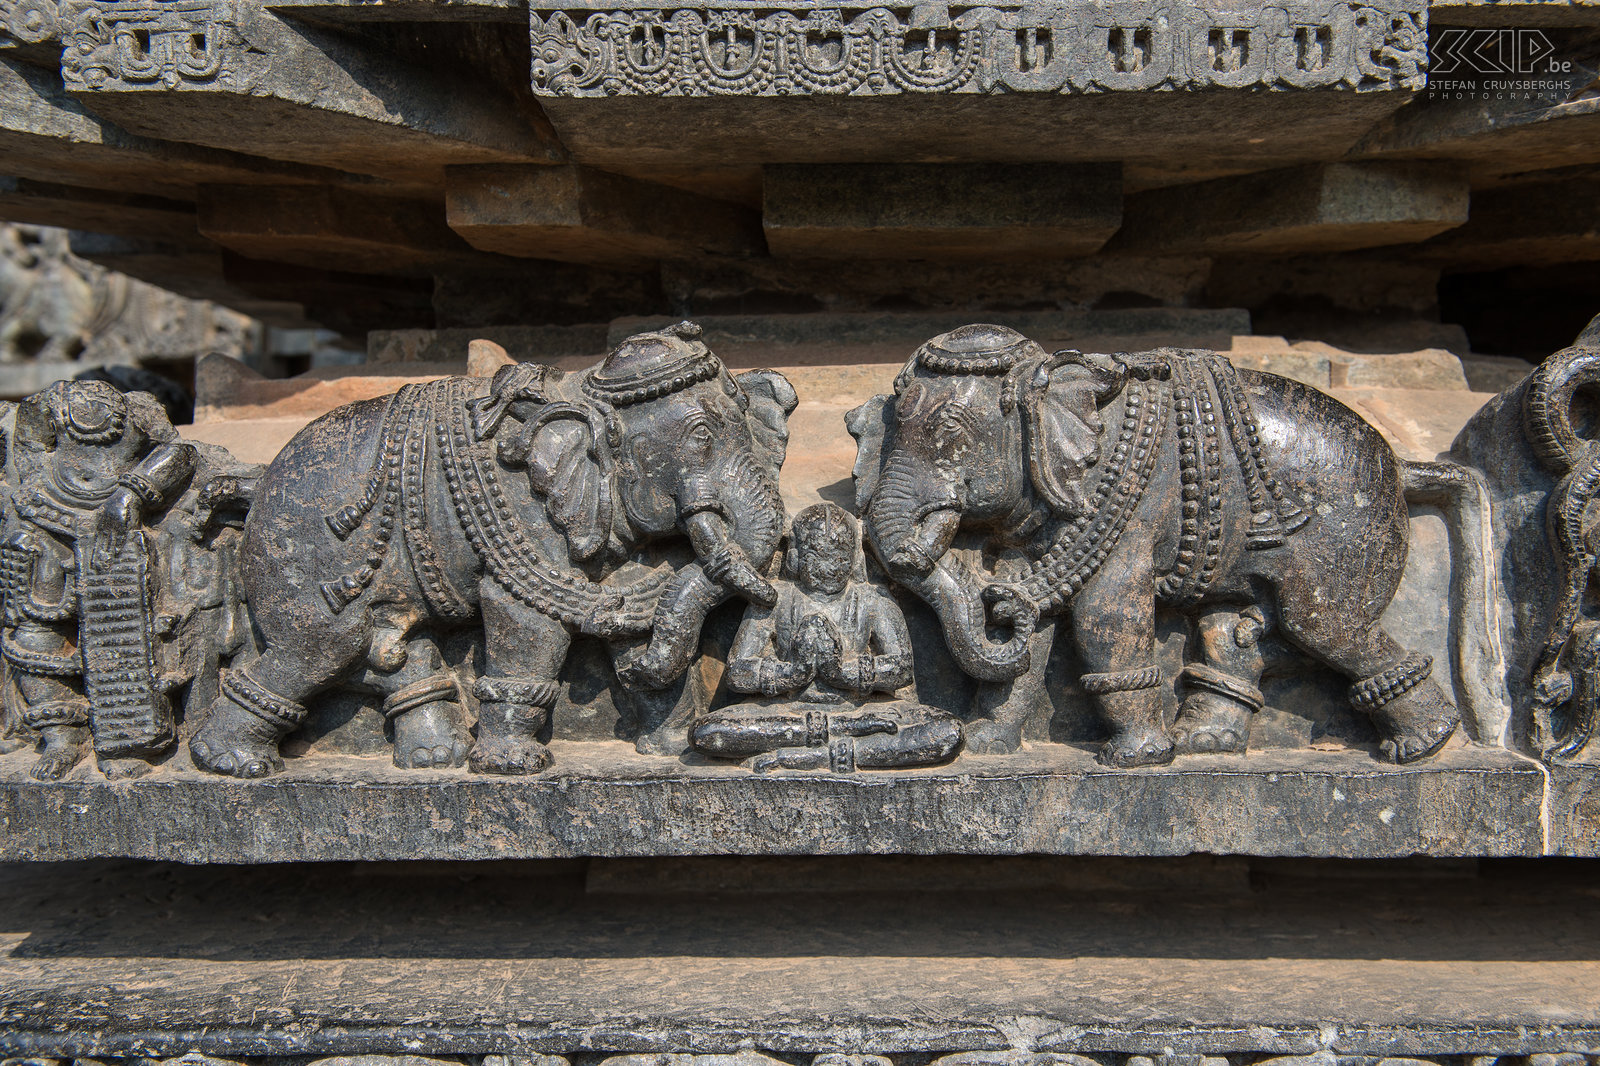 Halebidu The walls of the Hoysala temple in Halebidu are covered with beautiful delicate reliefs with many details. Stefan Cruysberghs